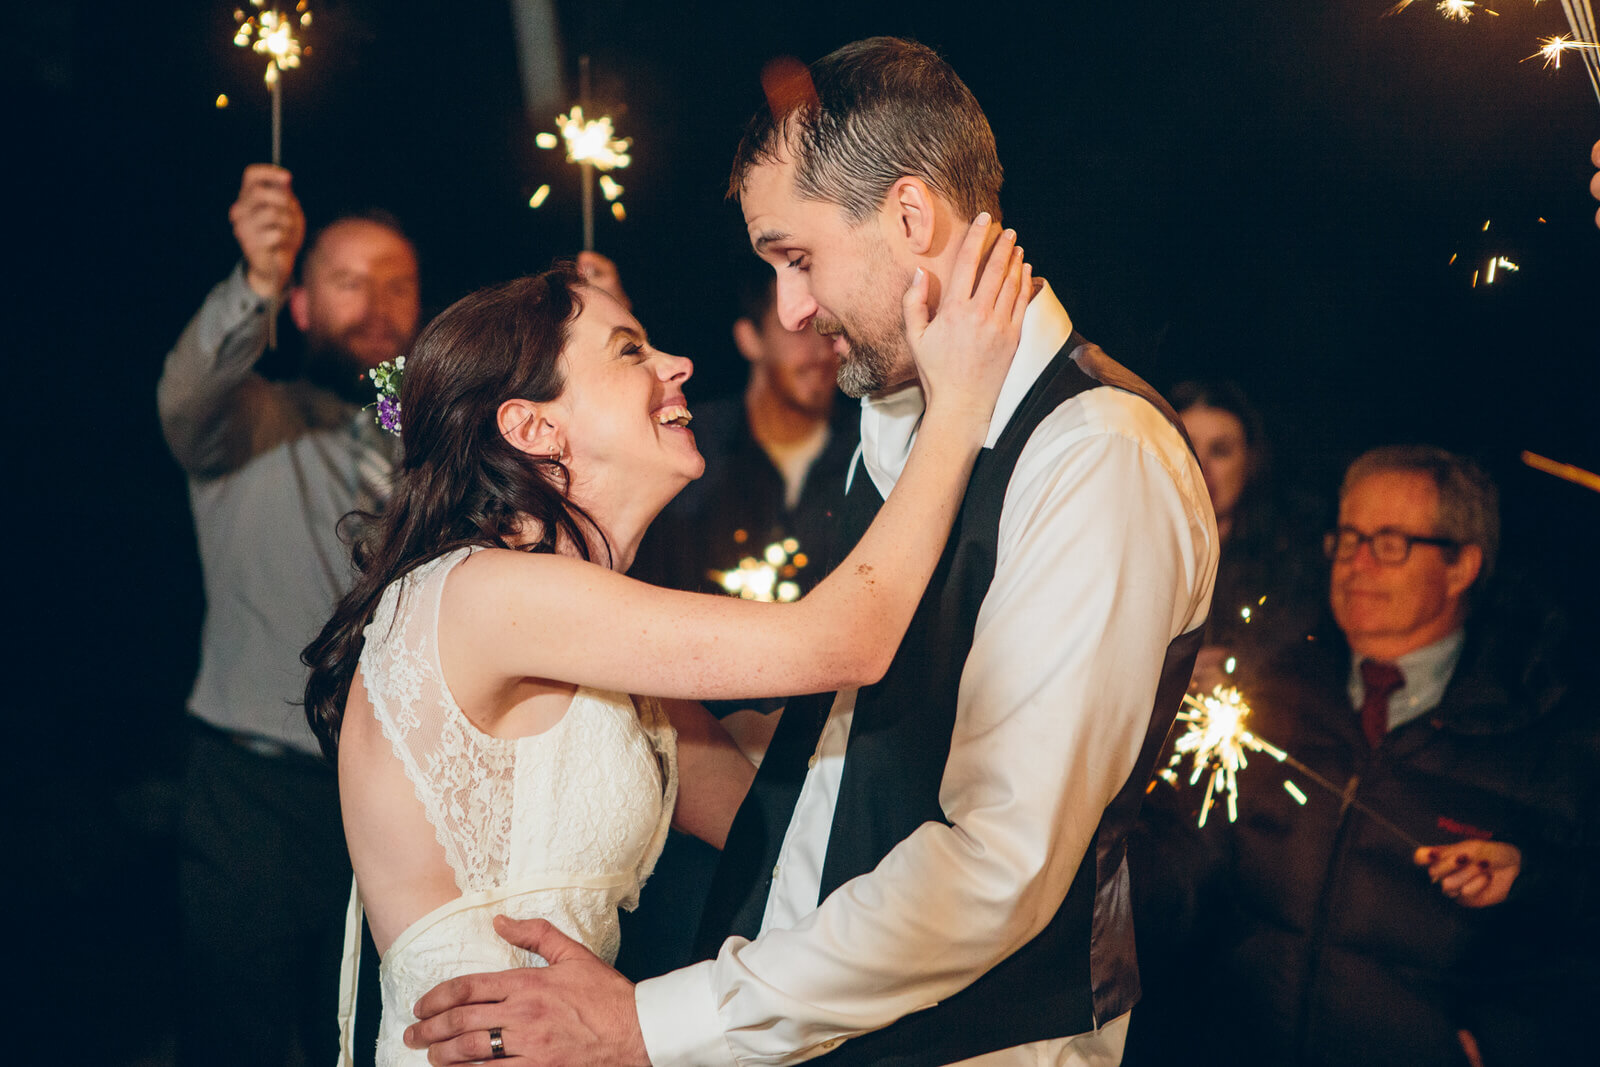 A bride and groom embrace as guests wave sparklers at their wedding at the Barn on Mullan in Missoula Montana